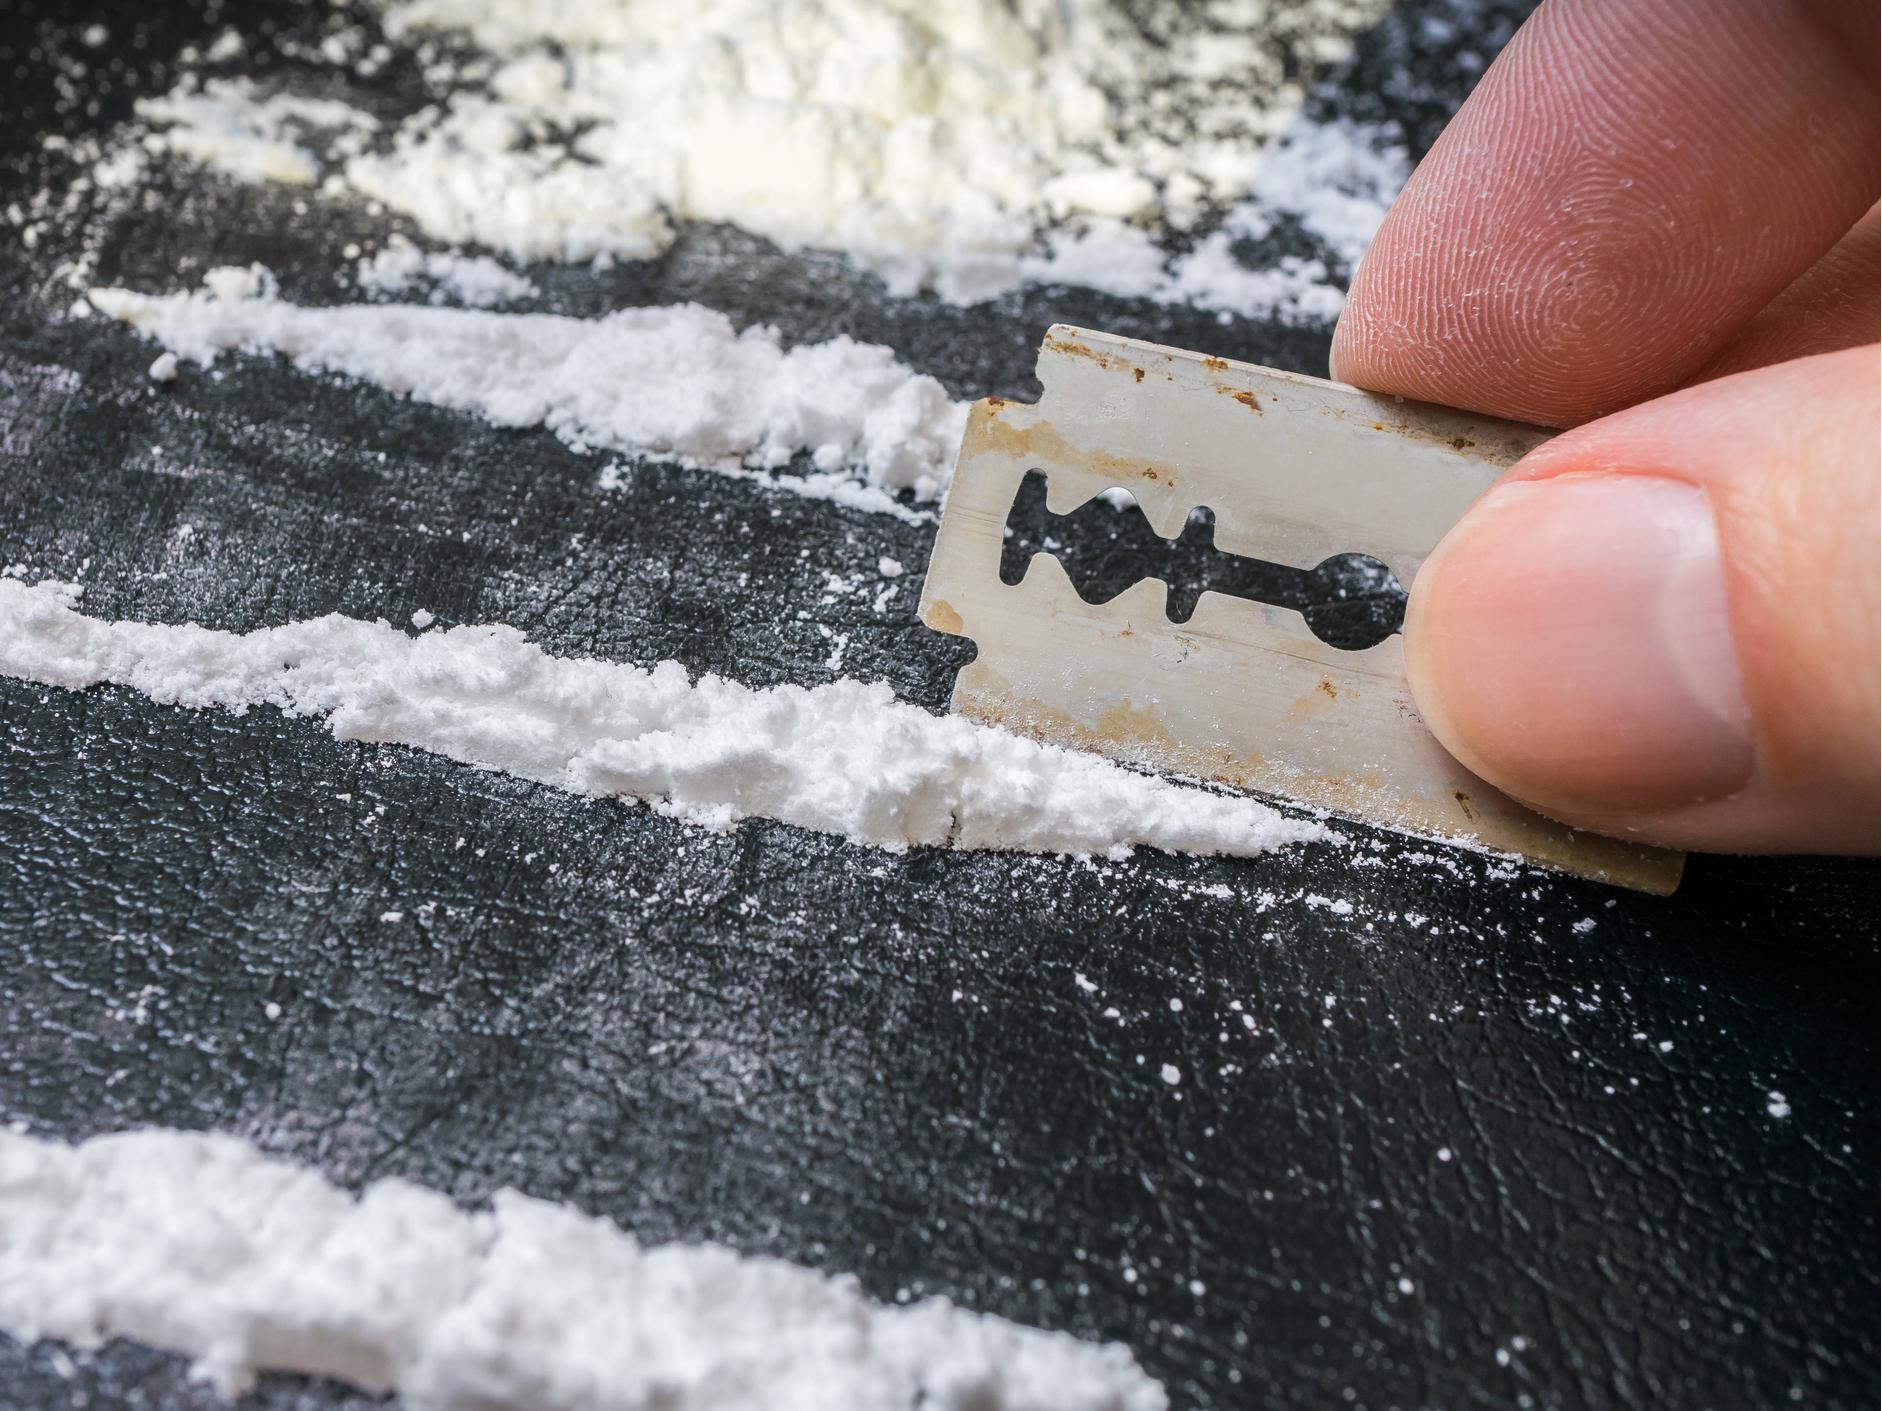 One in 10 people have traces of cocaine or heroin on fingerprints, study finds